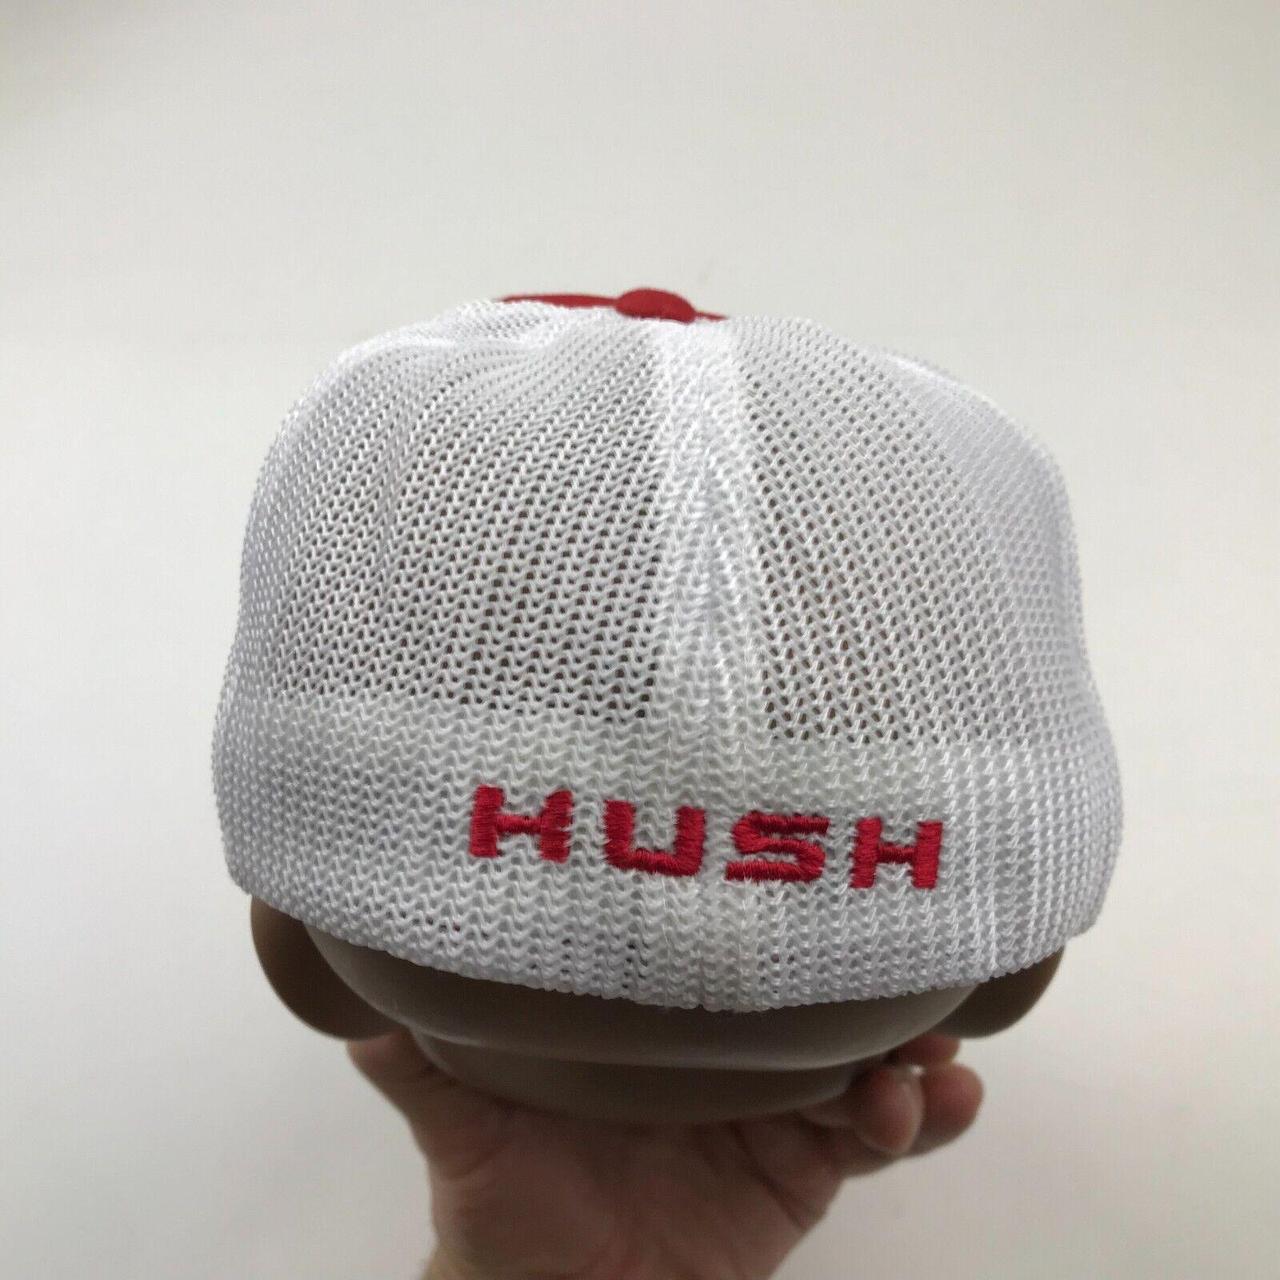 Hush Men's Red and White Hat (2)